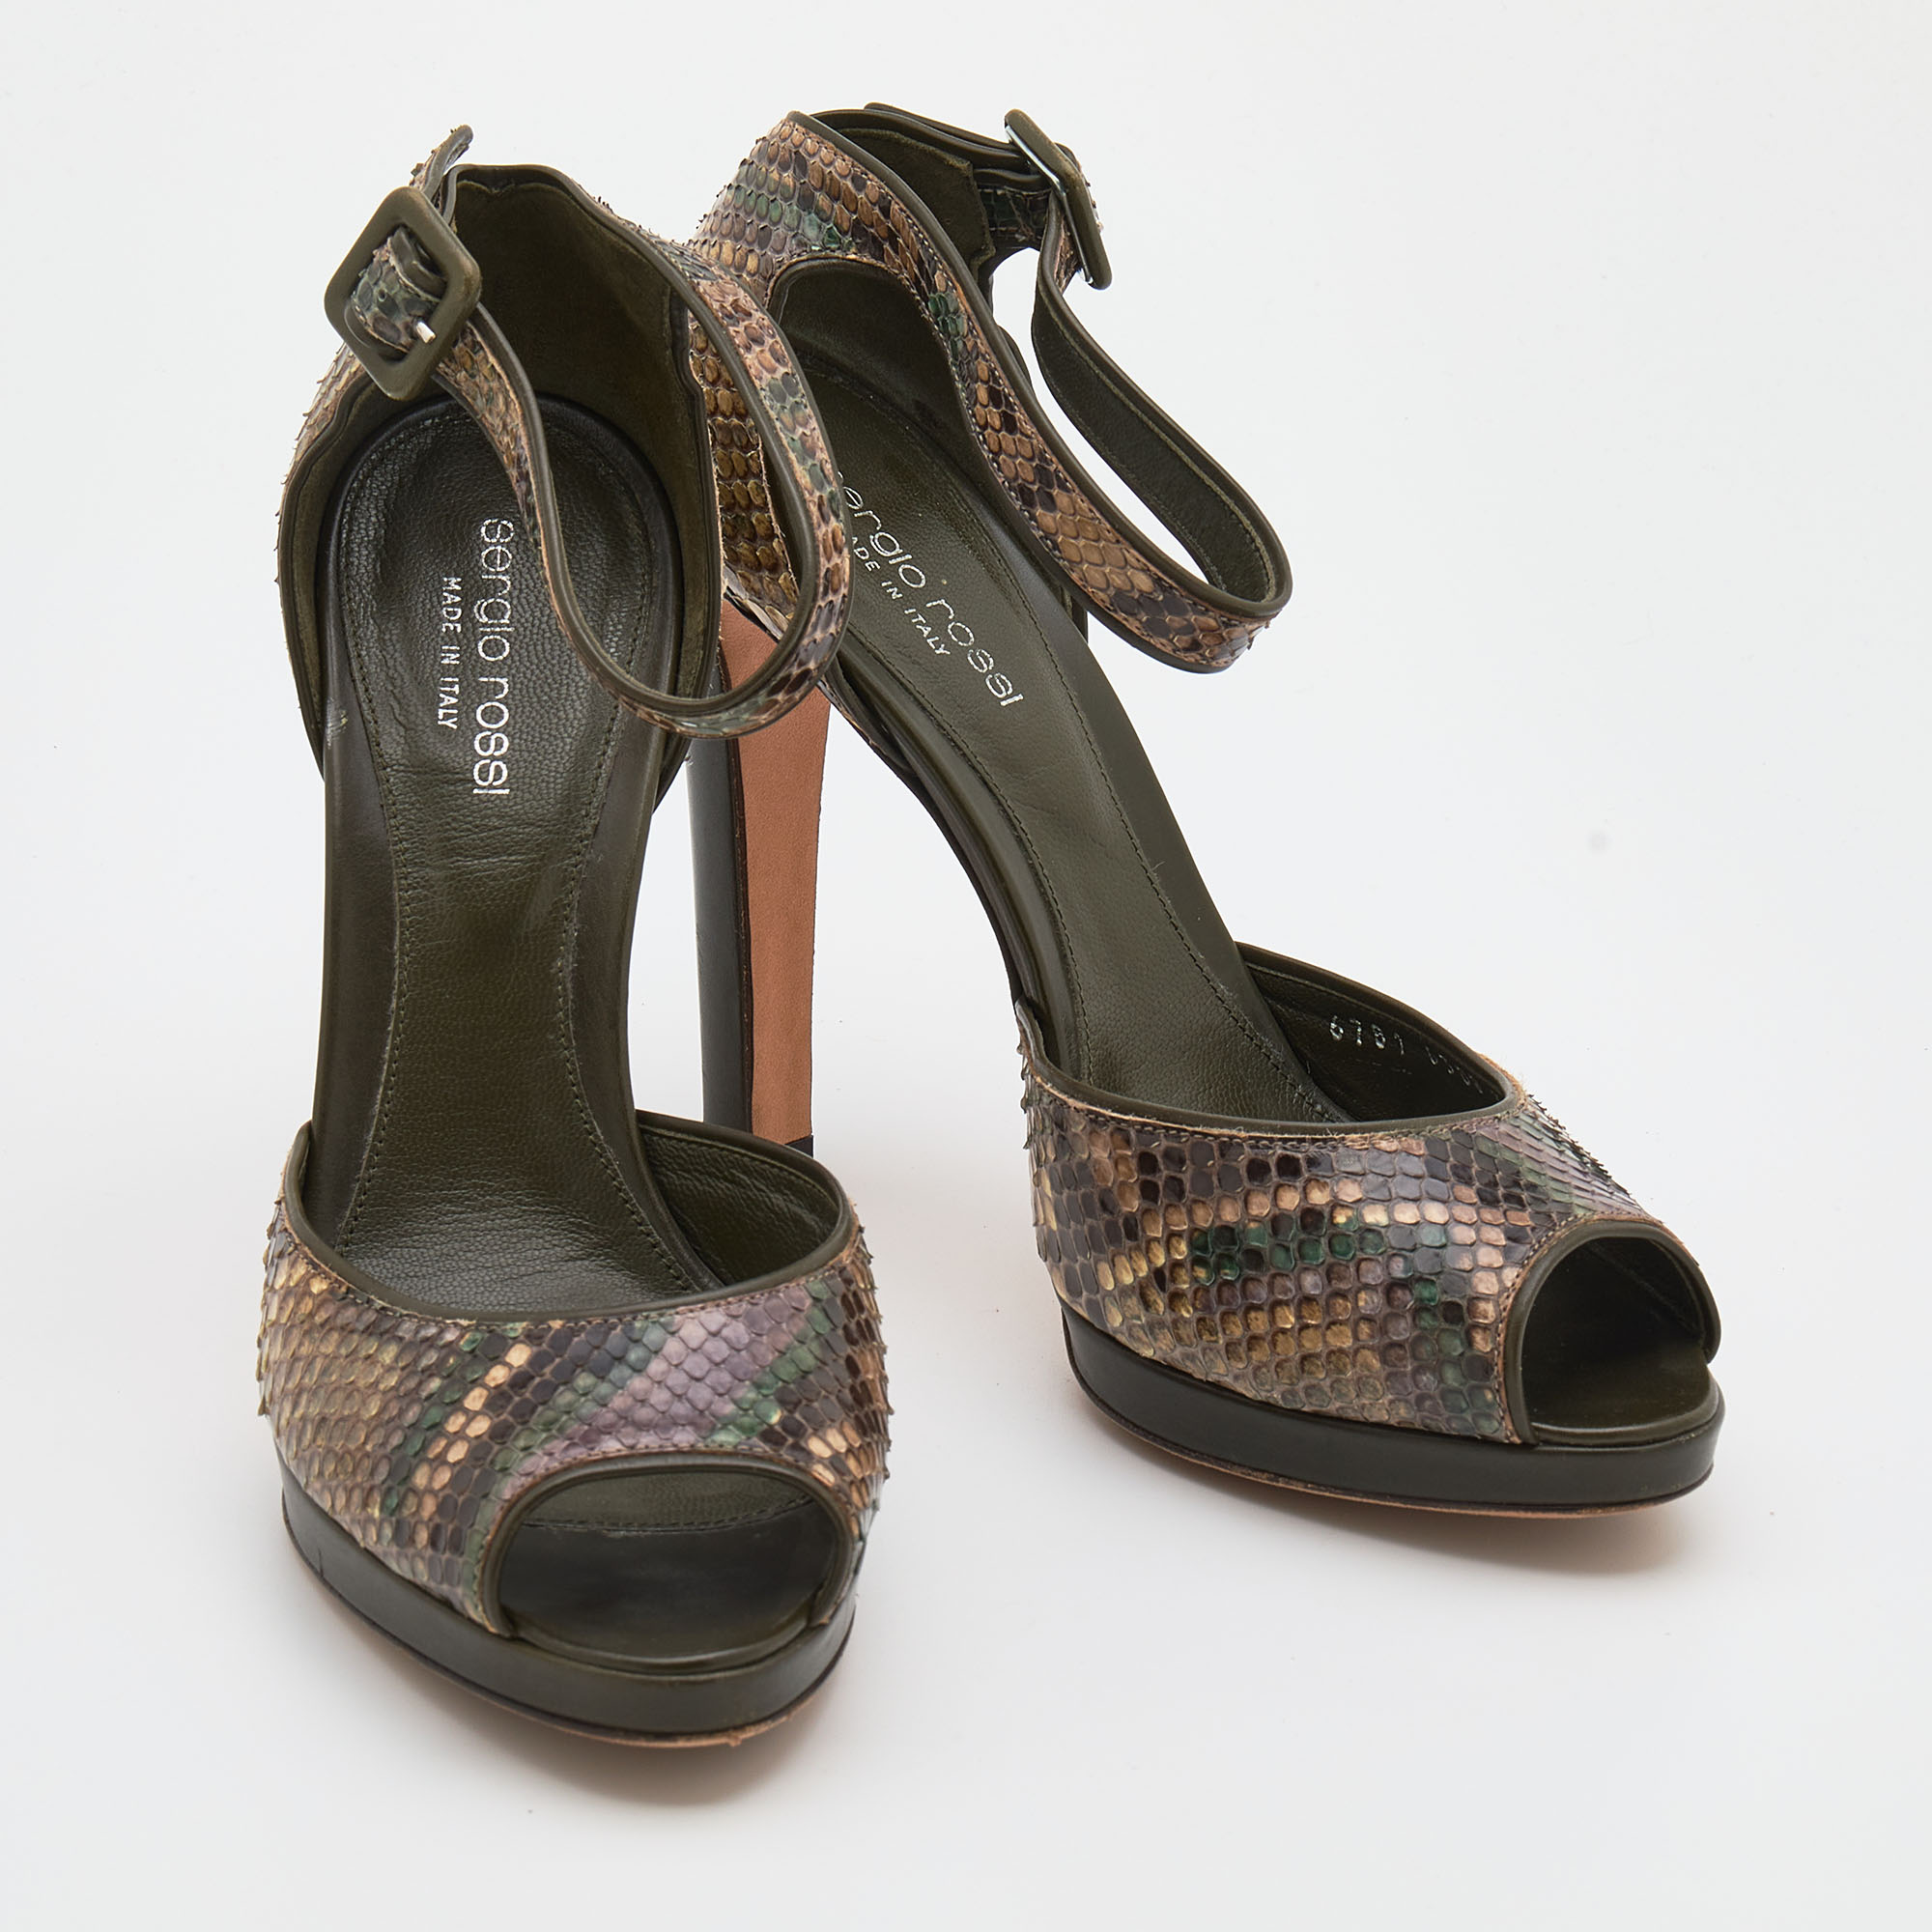 Sergio Rossi Multicolor Python And Leather Trim Ankle Strap Sandals Size 39